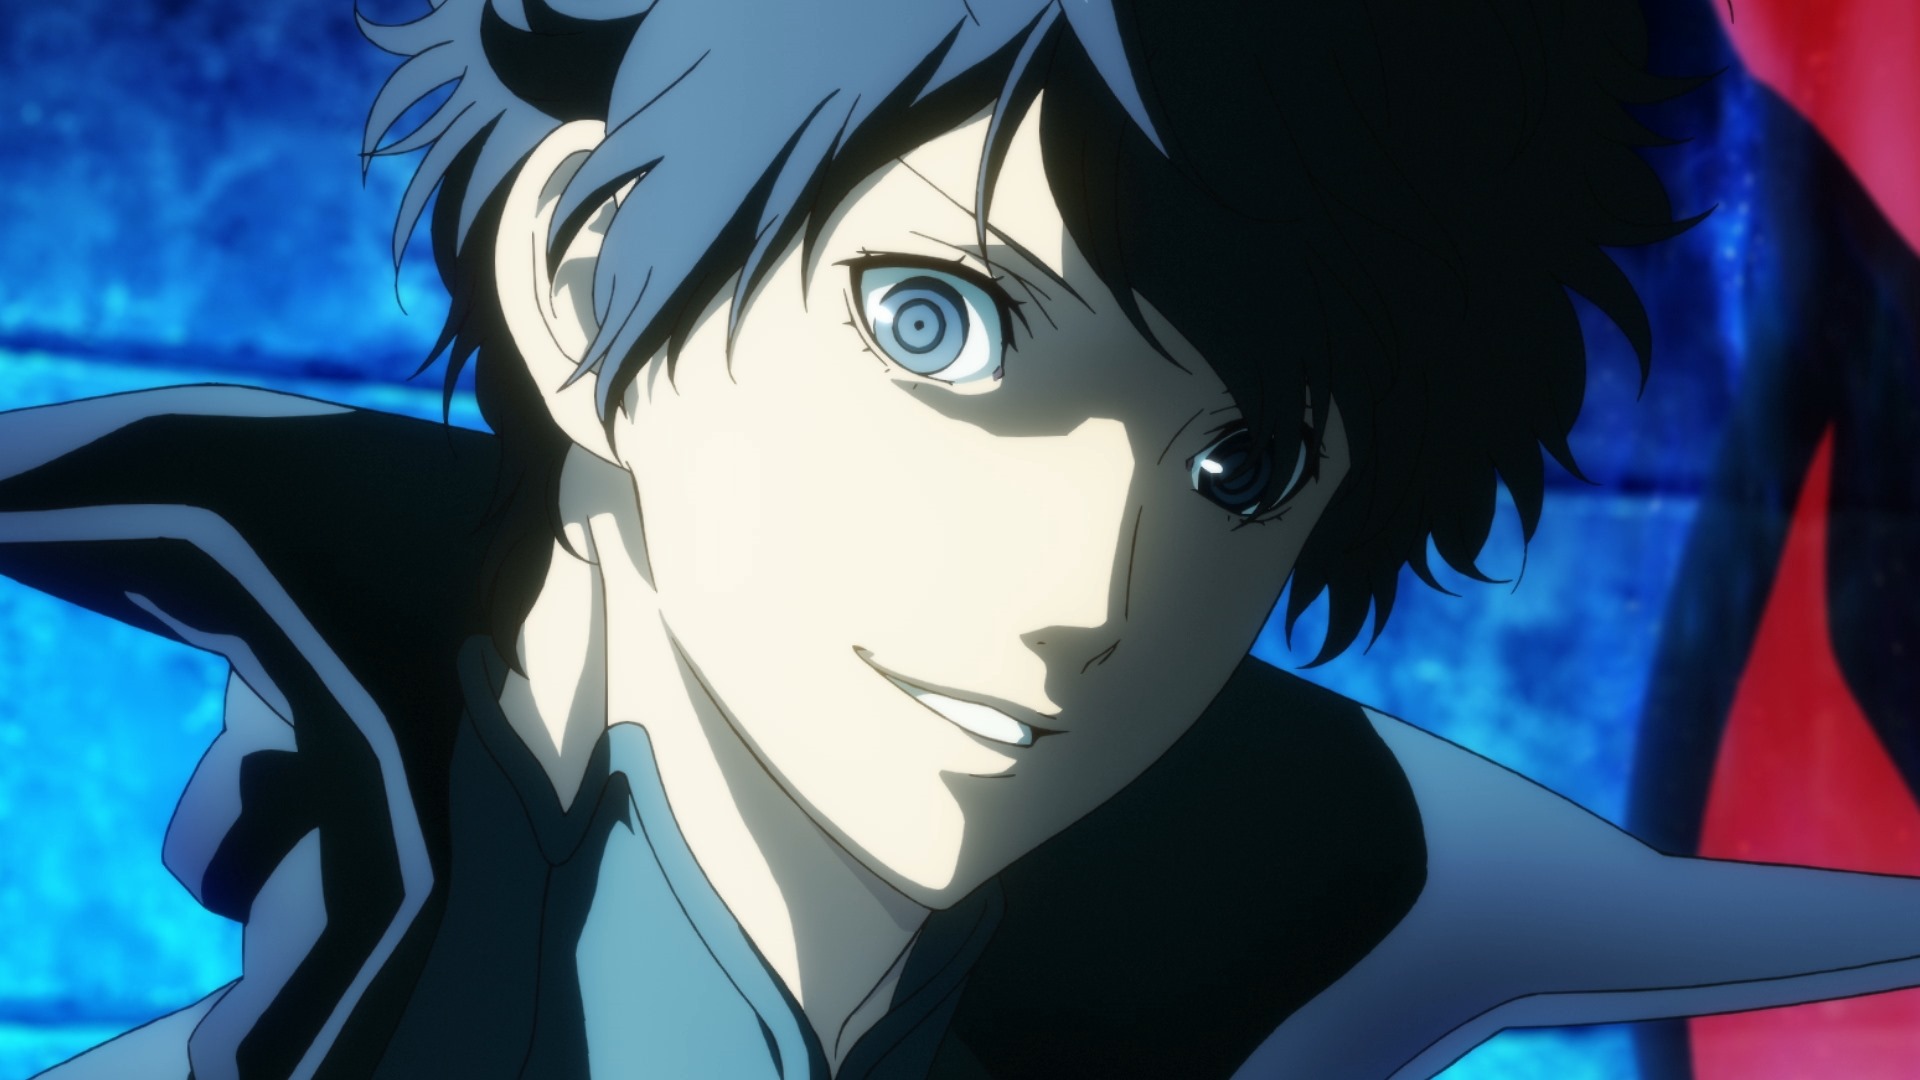 Persona 5 Anime Series Japanese Launch Date Revealed, Main Character Gets  New Canon Name